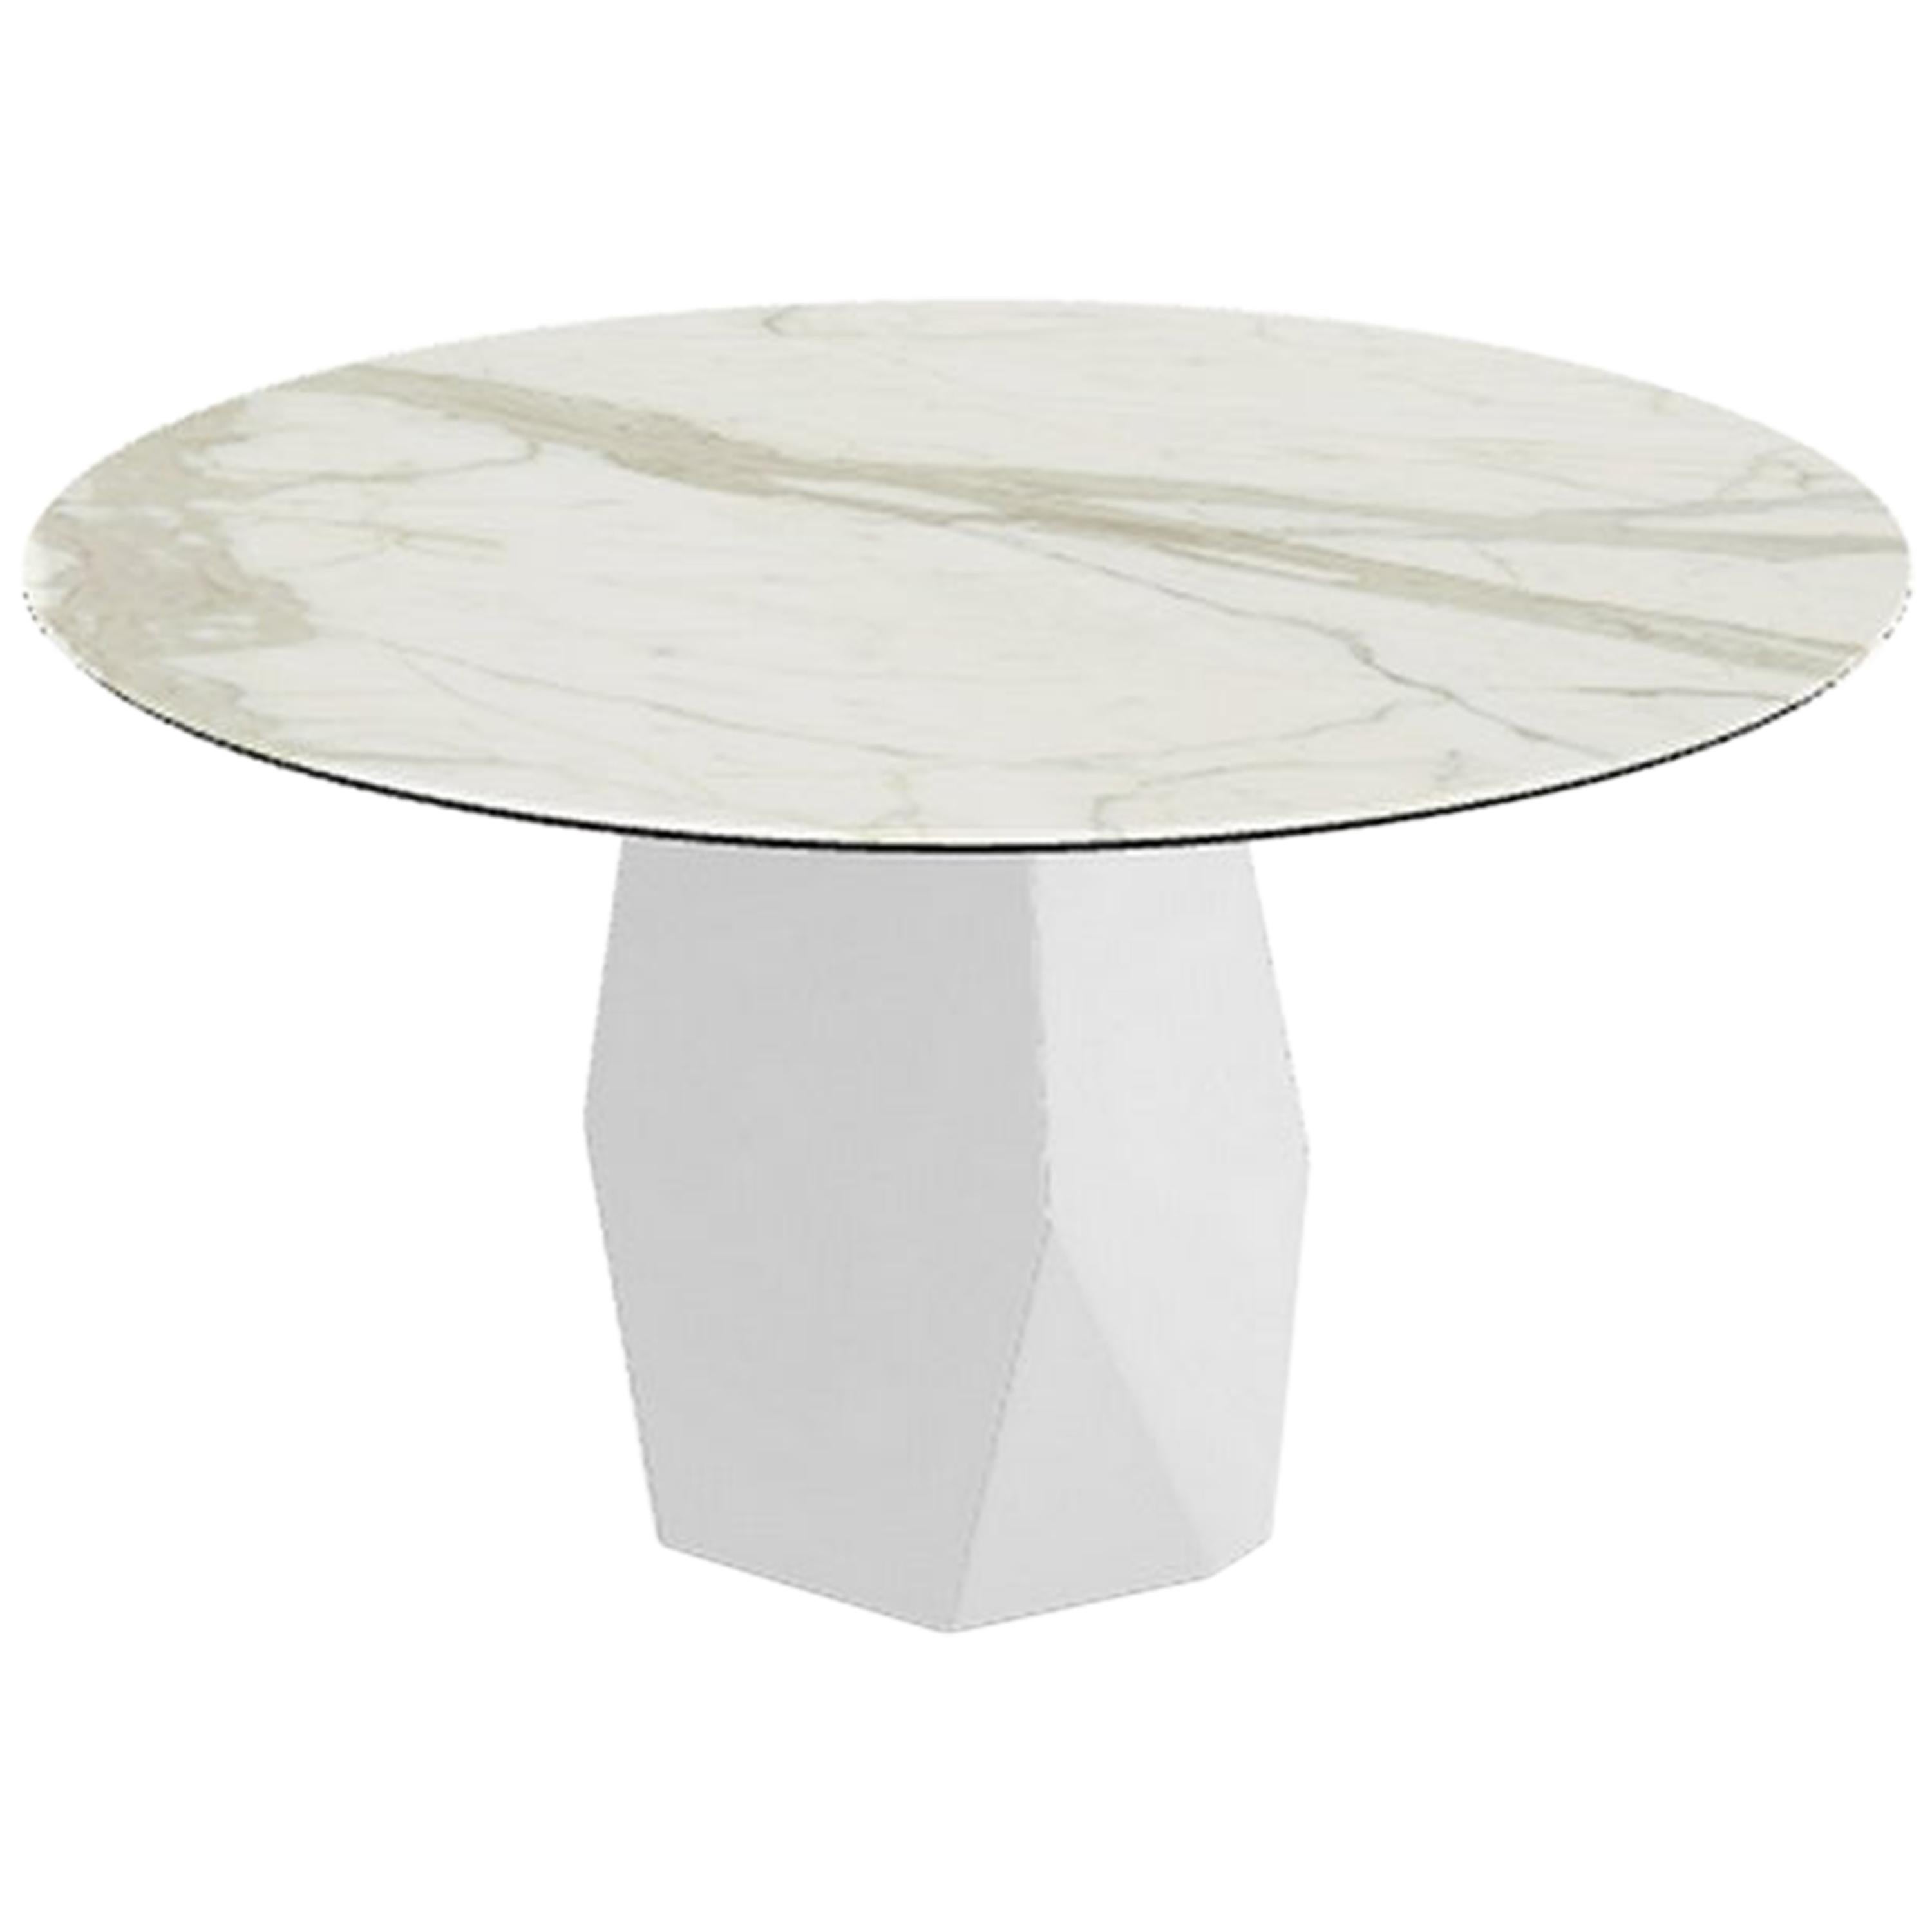 Menhir, Dining Table Round with Calacatta Ceramic Top on Metal Base